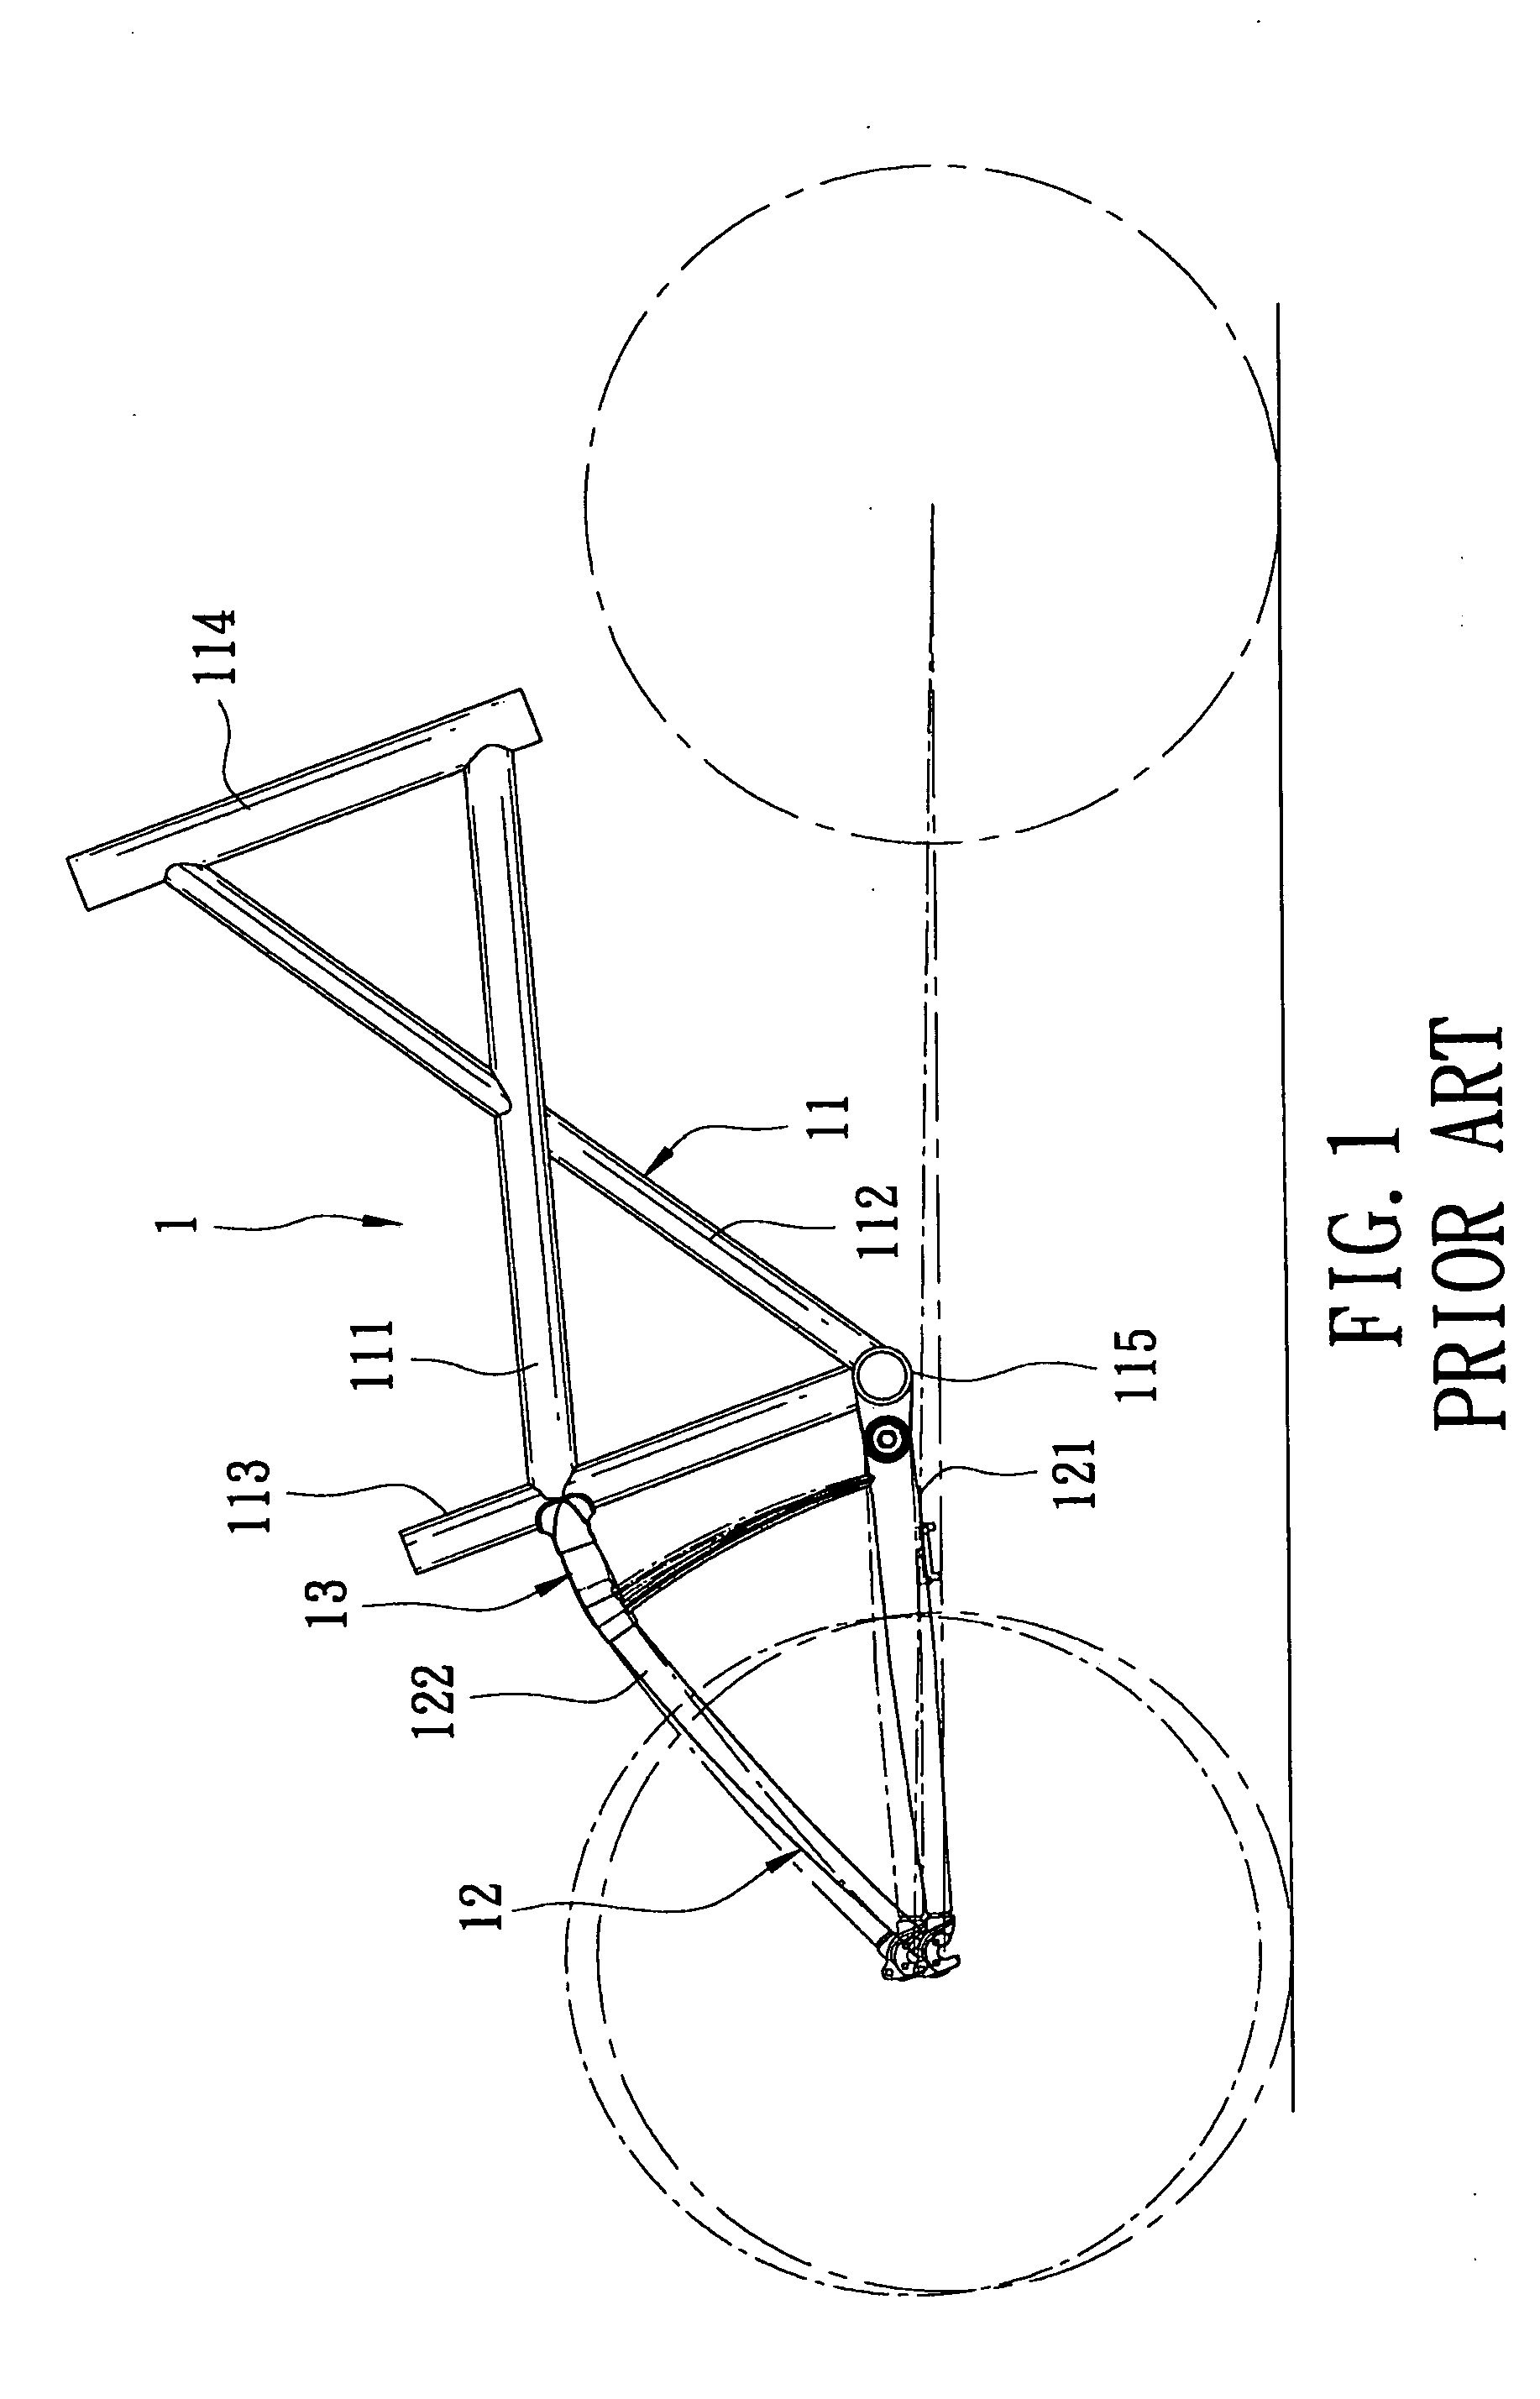 Shock absorbing frame for a bicycle